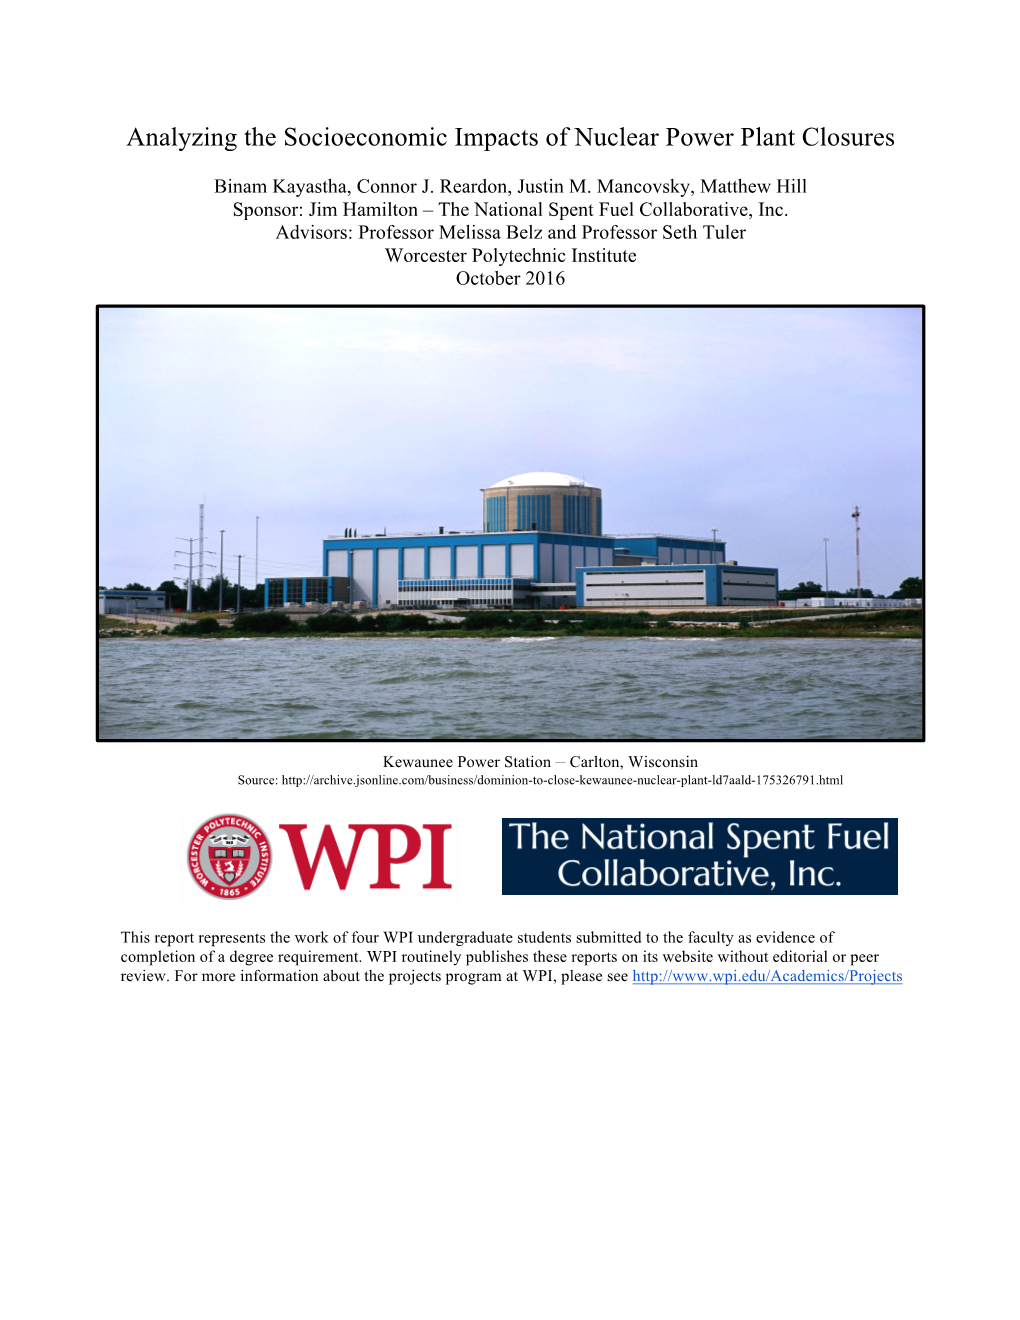 Analyzing the Socioeconomic Impacts of Nuclear Power Plant Closures